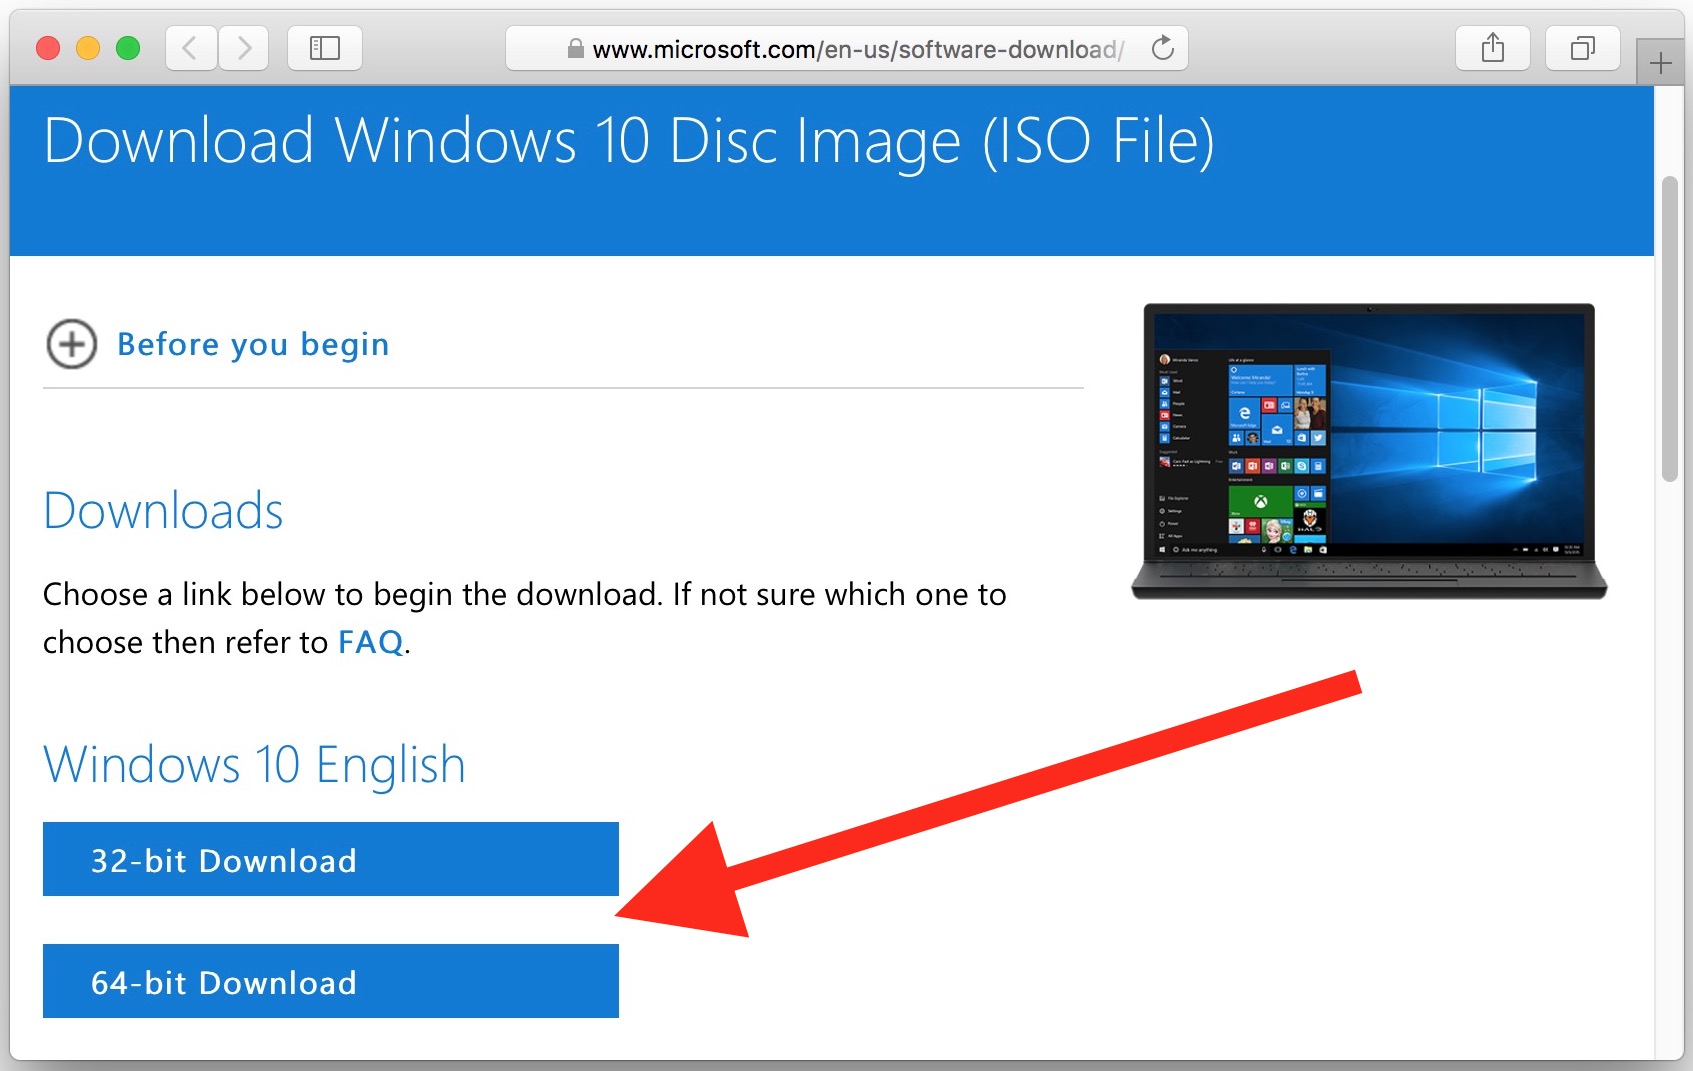 windows 10 home iso file download